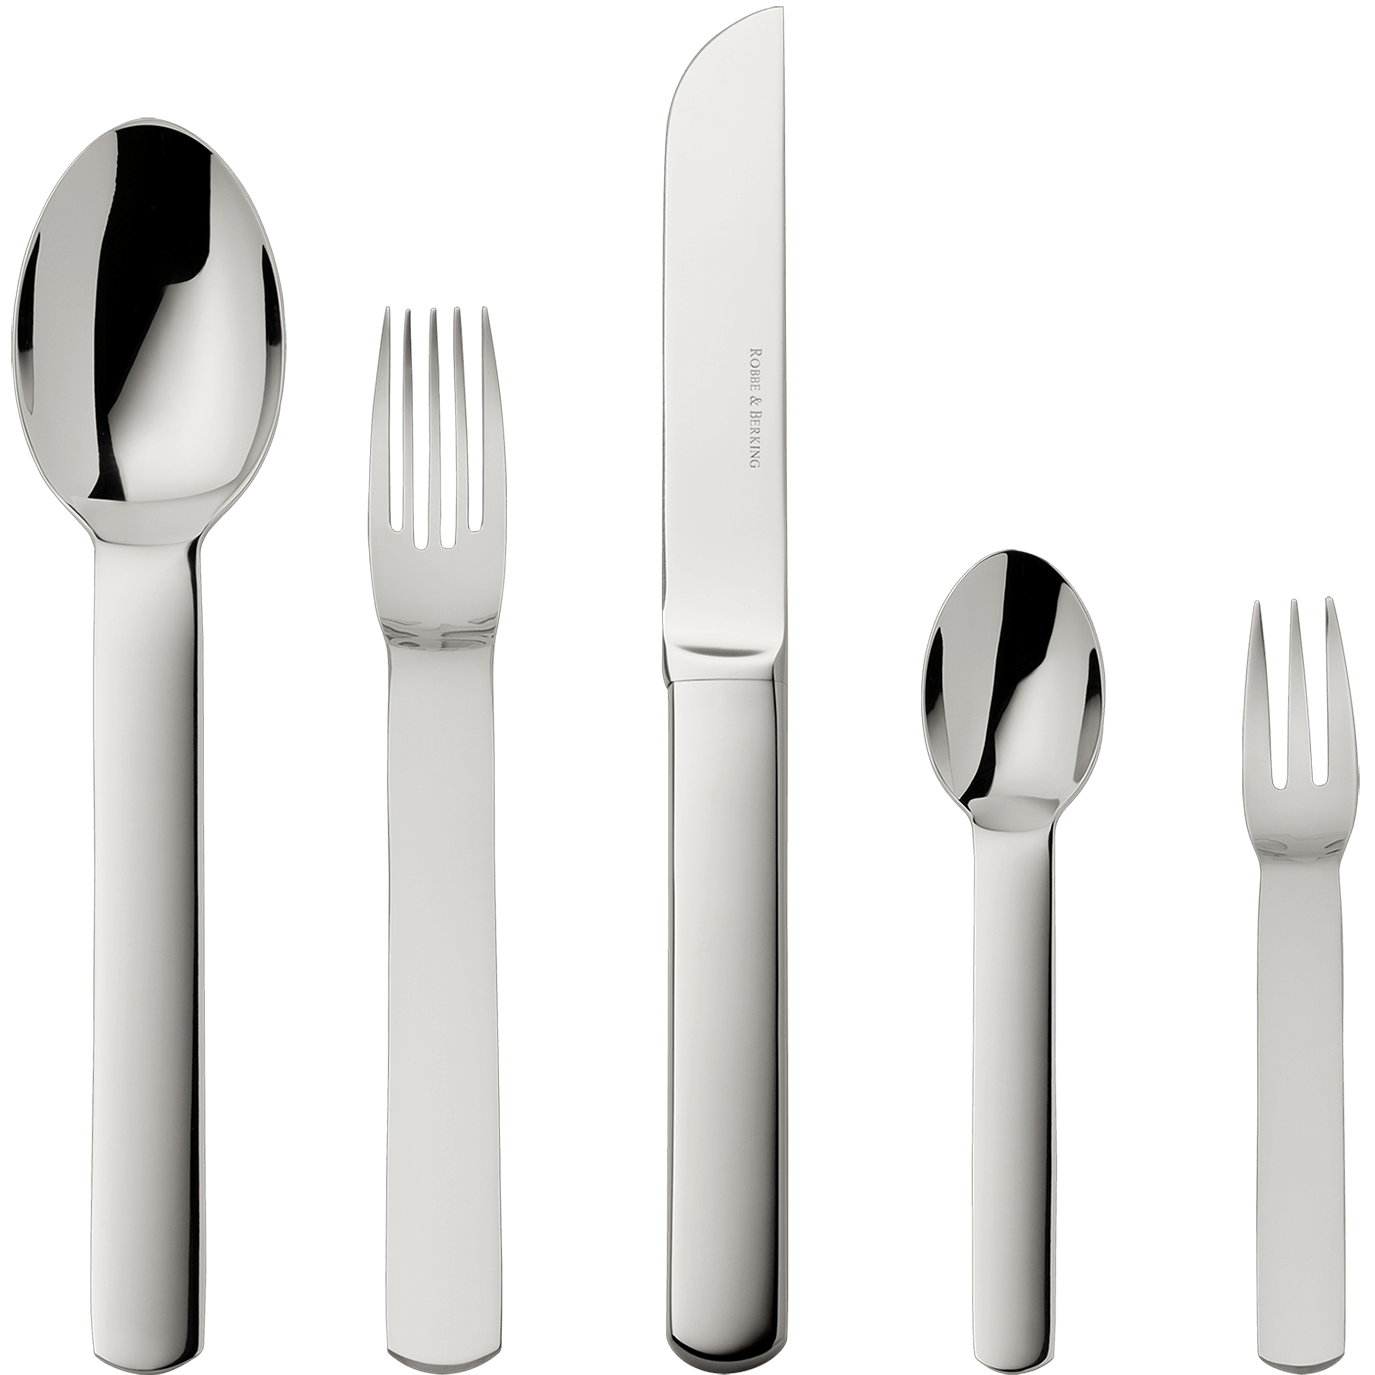 Topos 5-piece place setting (18/8 stainless steel)